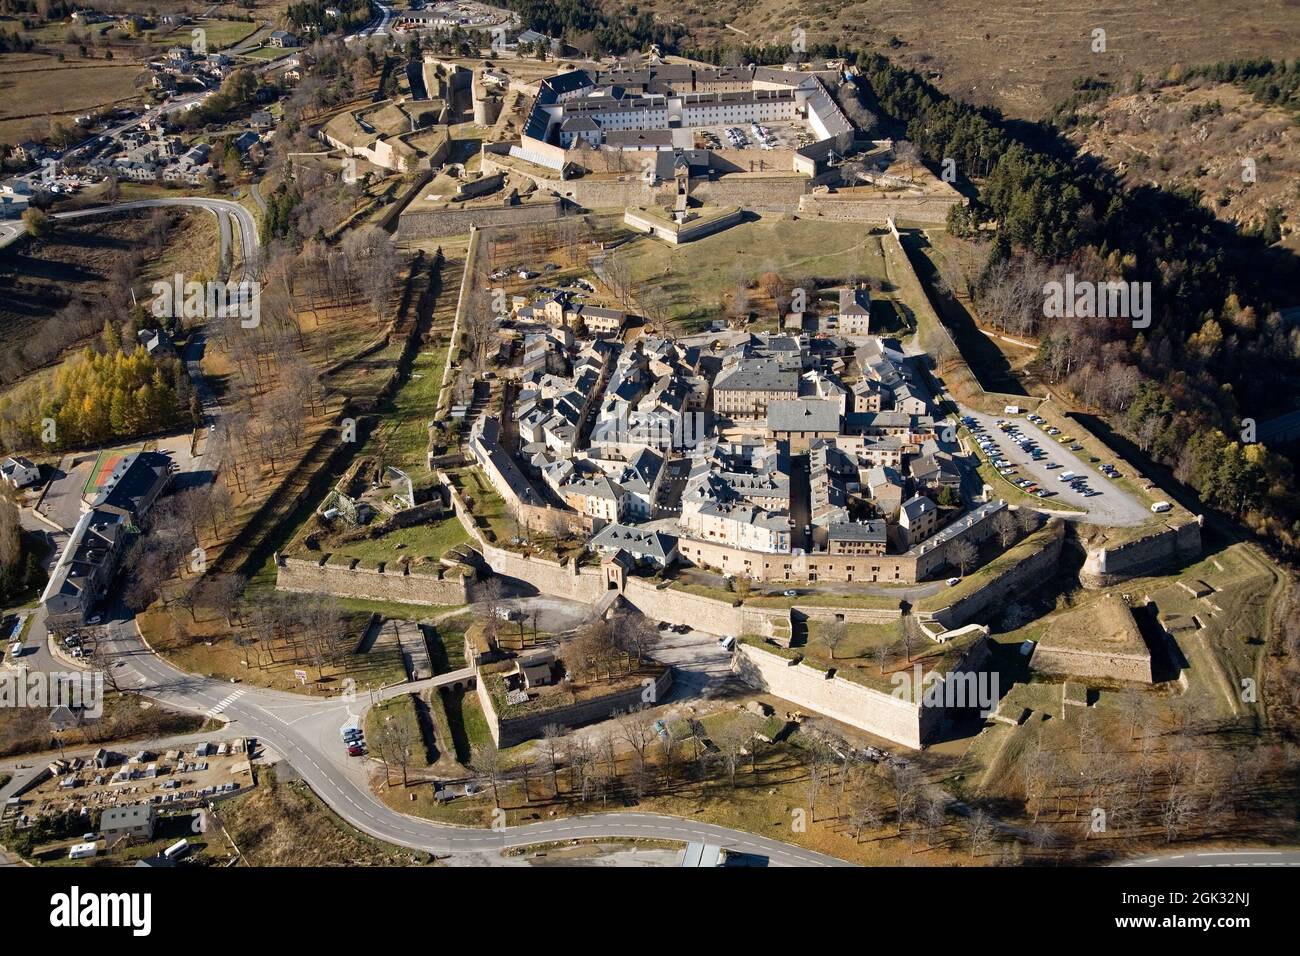 France. Pyrénées Orientales (66).Cerdanya region. The citadel of Mont Louis built by Vauban (classified as World Heritage by Unesco). The walled city Stock Photo